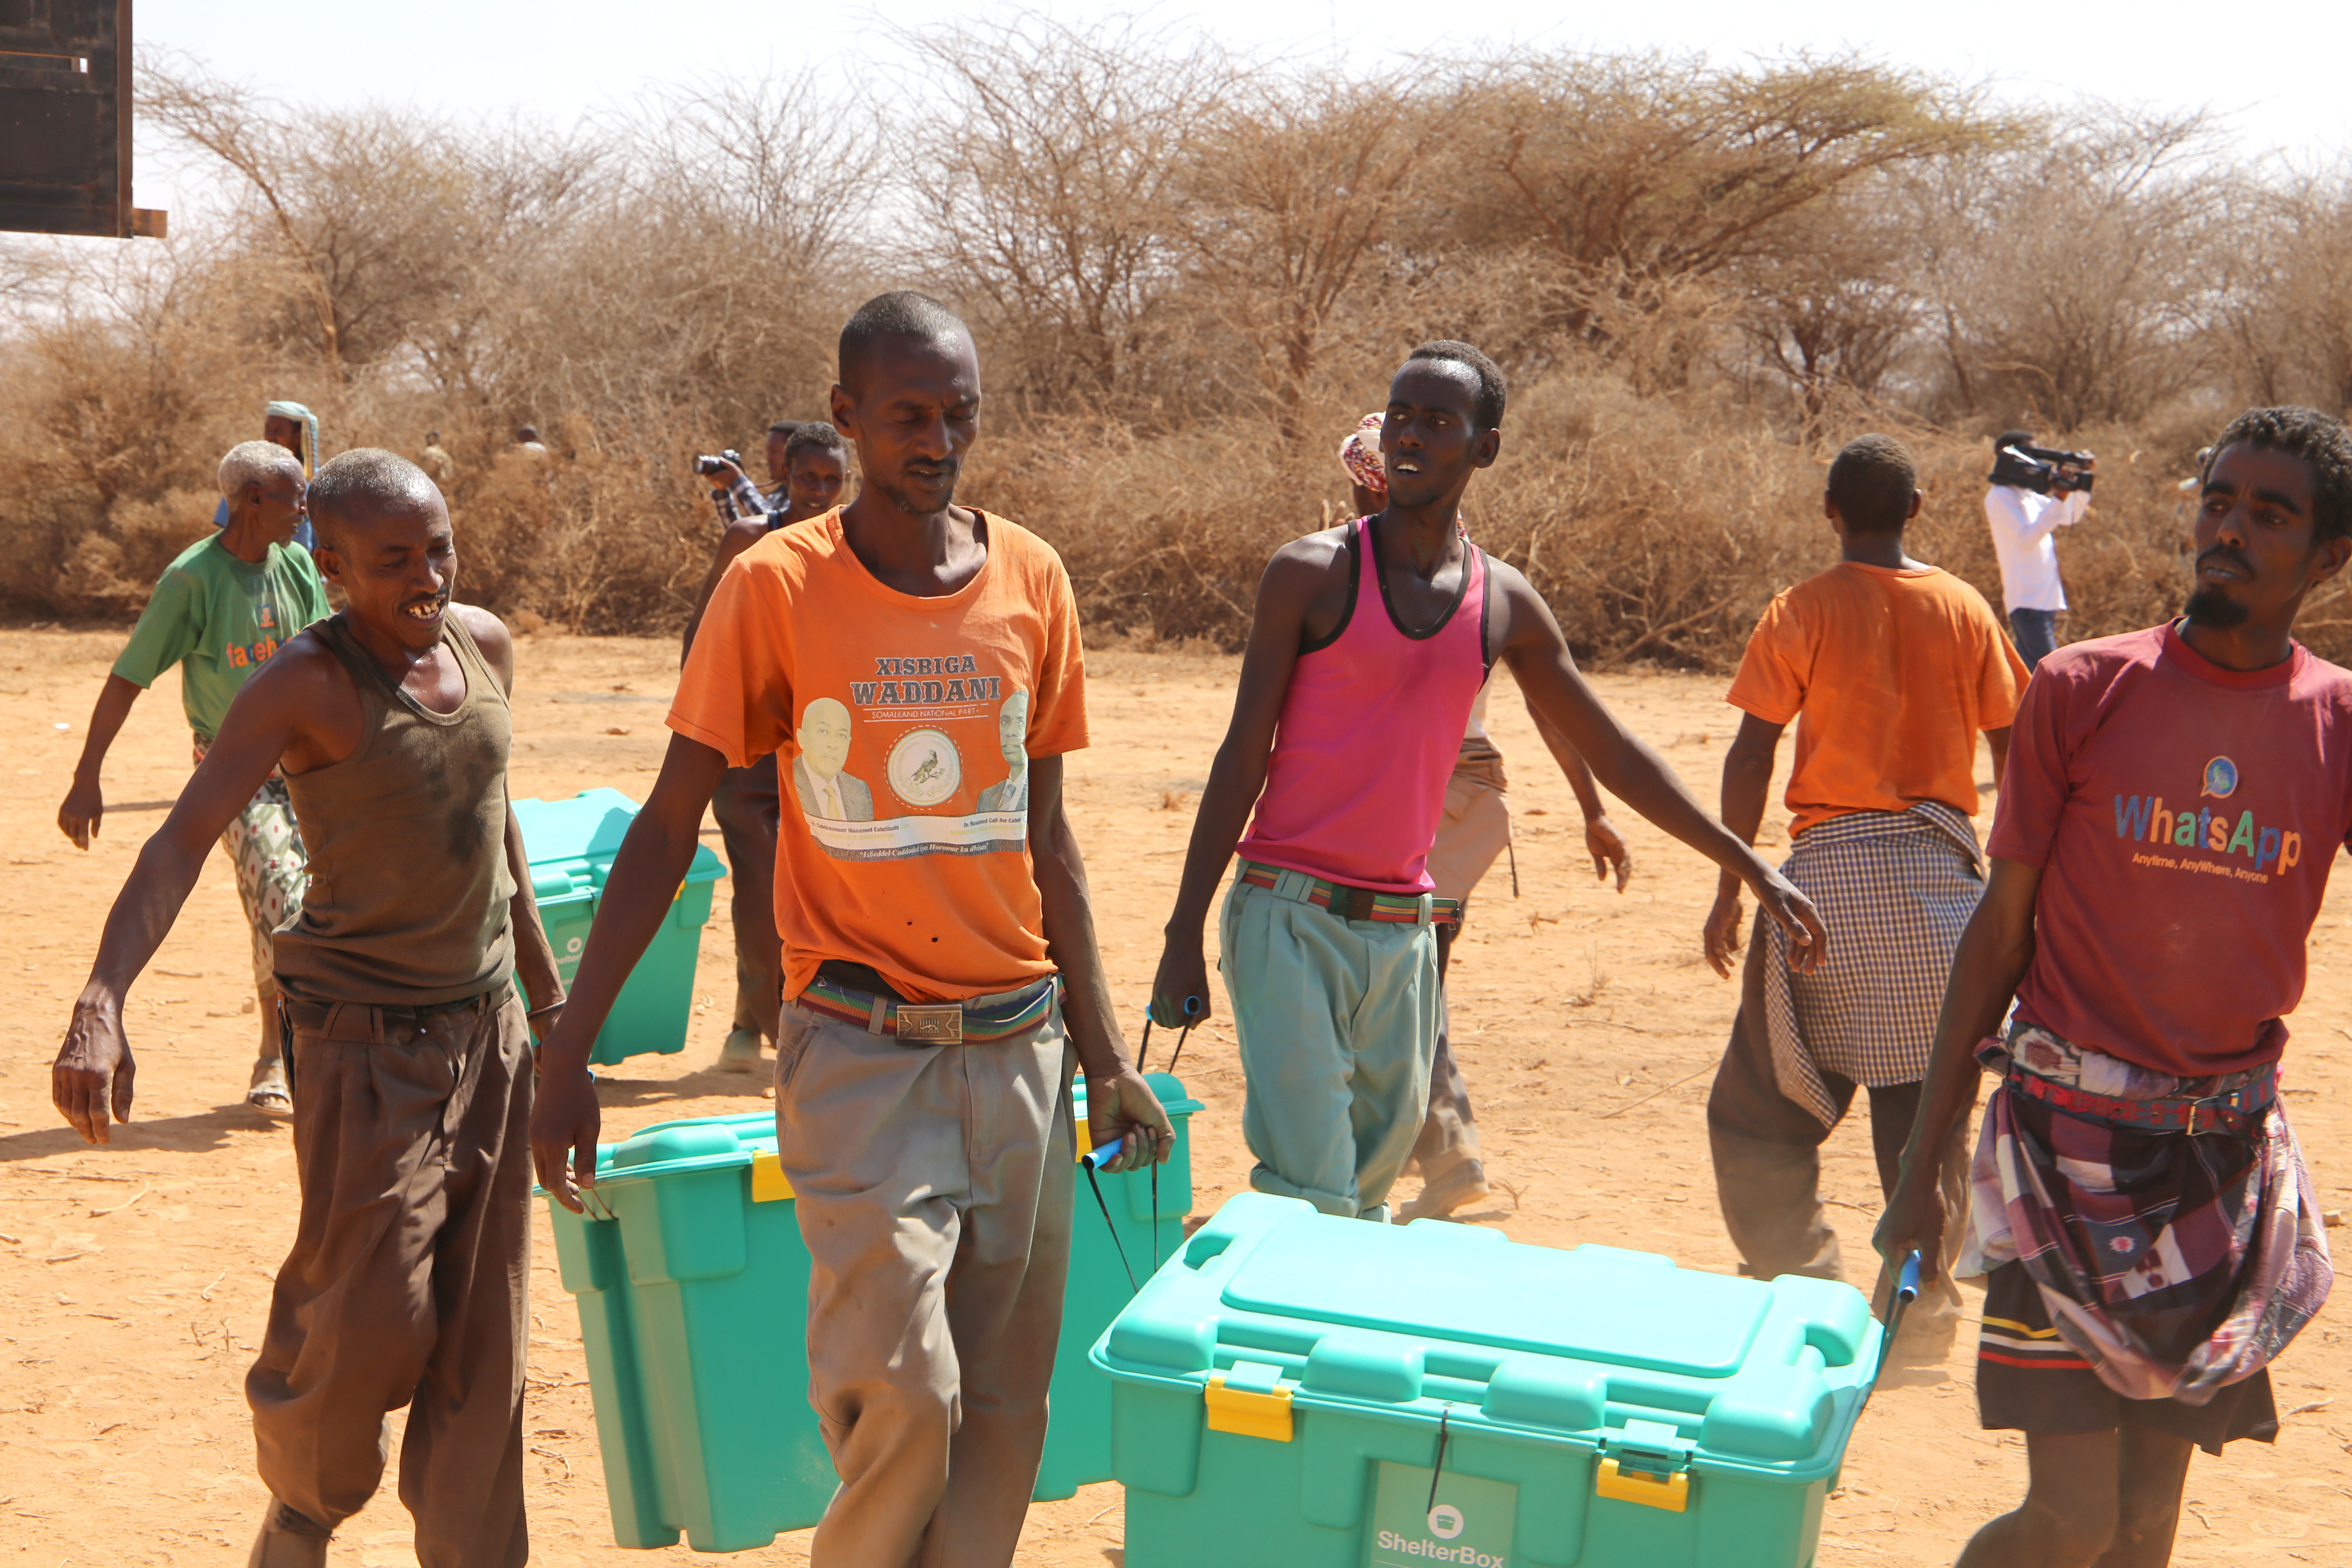 ShelterBox distributes essential aid to families affected by severe drought in Somaliland.